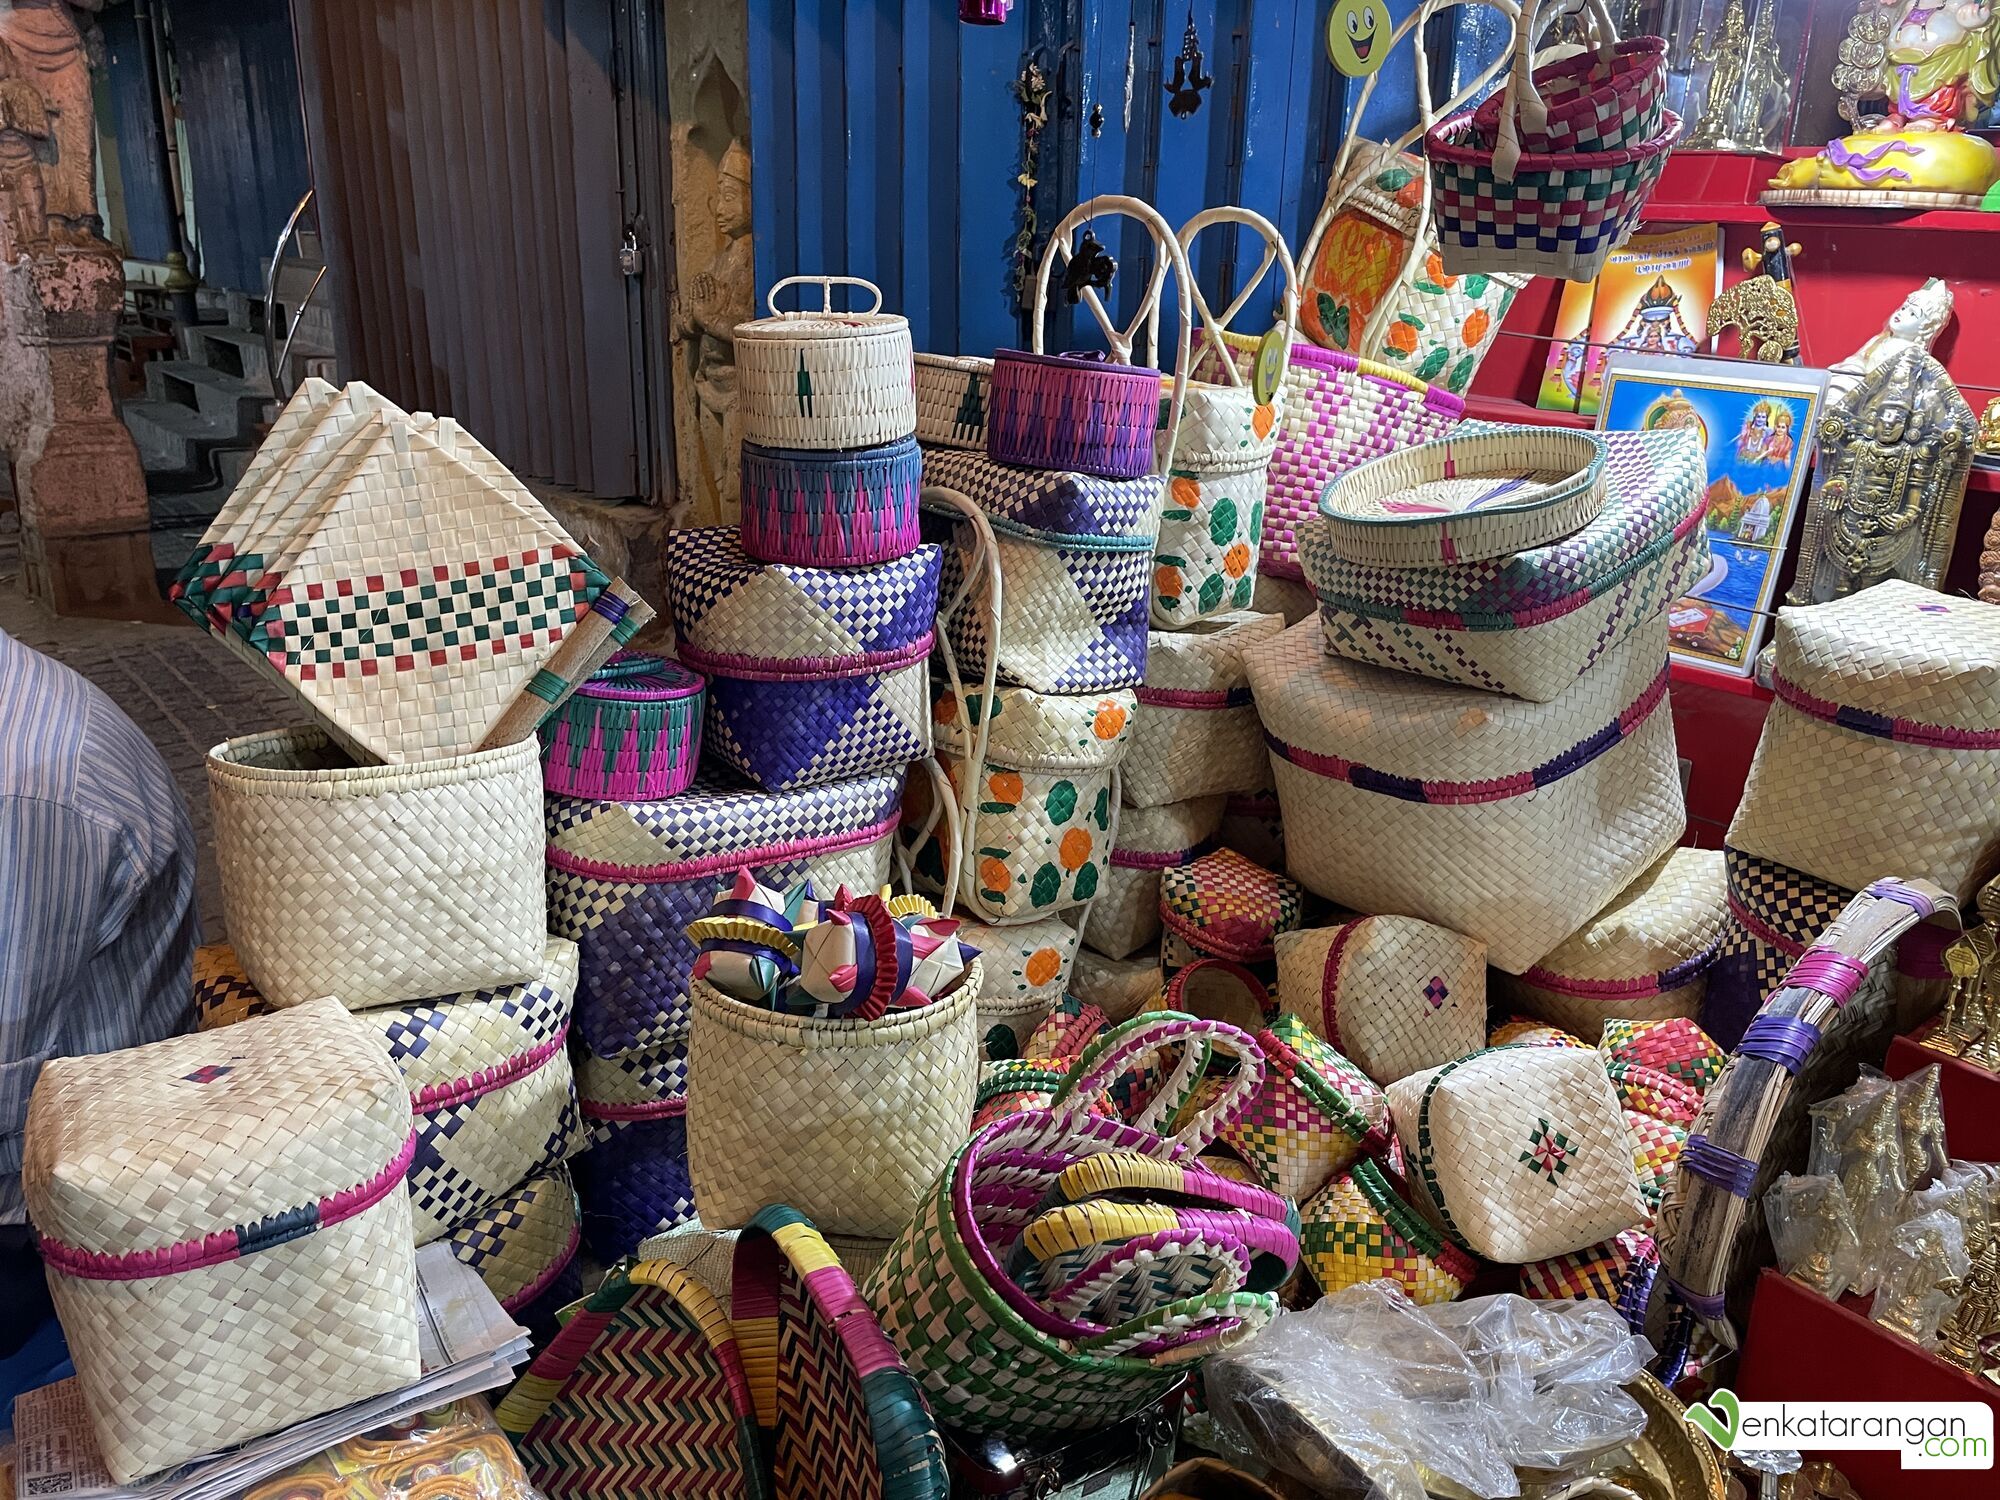 Shops near the temple selling variety of eco-friendly bags and containers made out of palm leaves